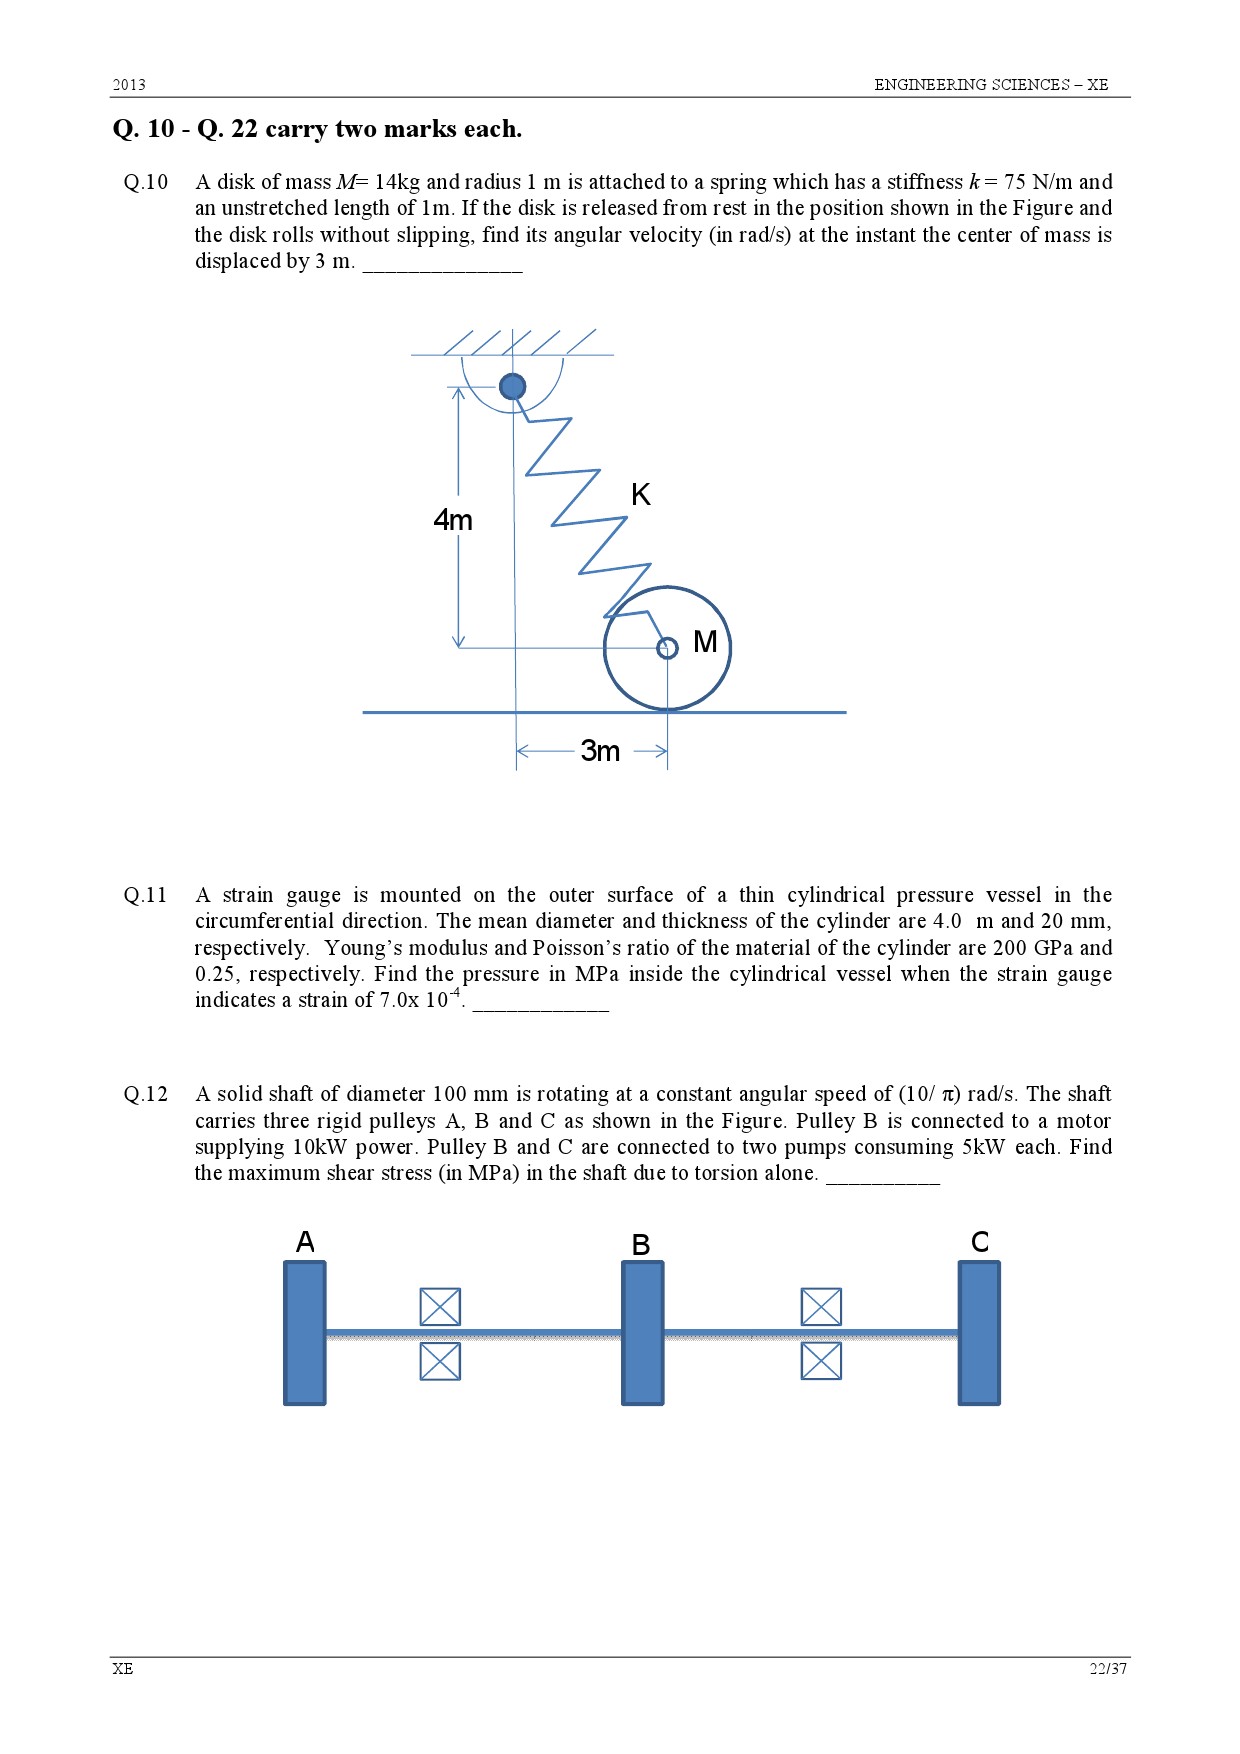 GATE Exam Question Paper 2013 Engineering Sciences 22